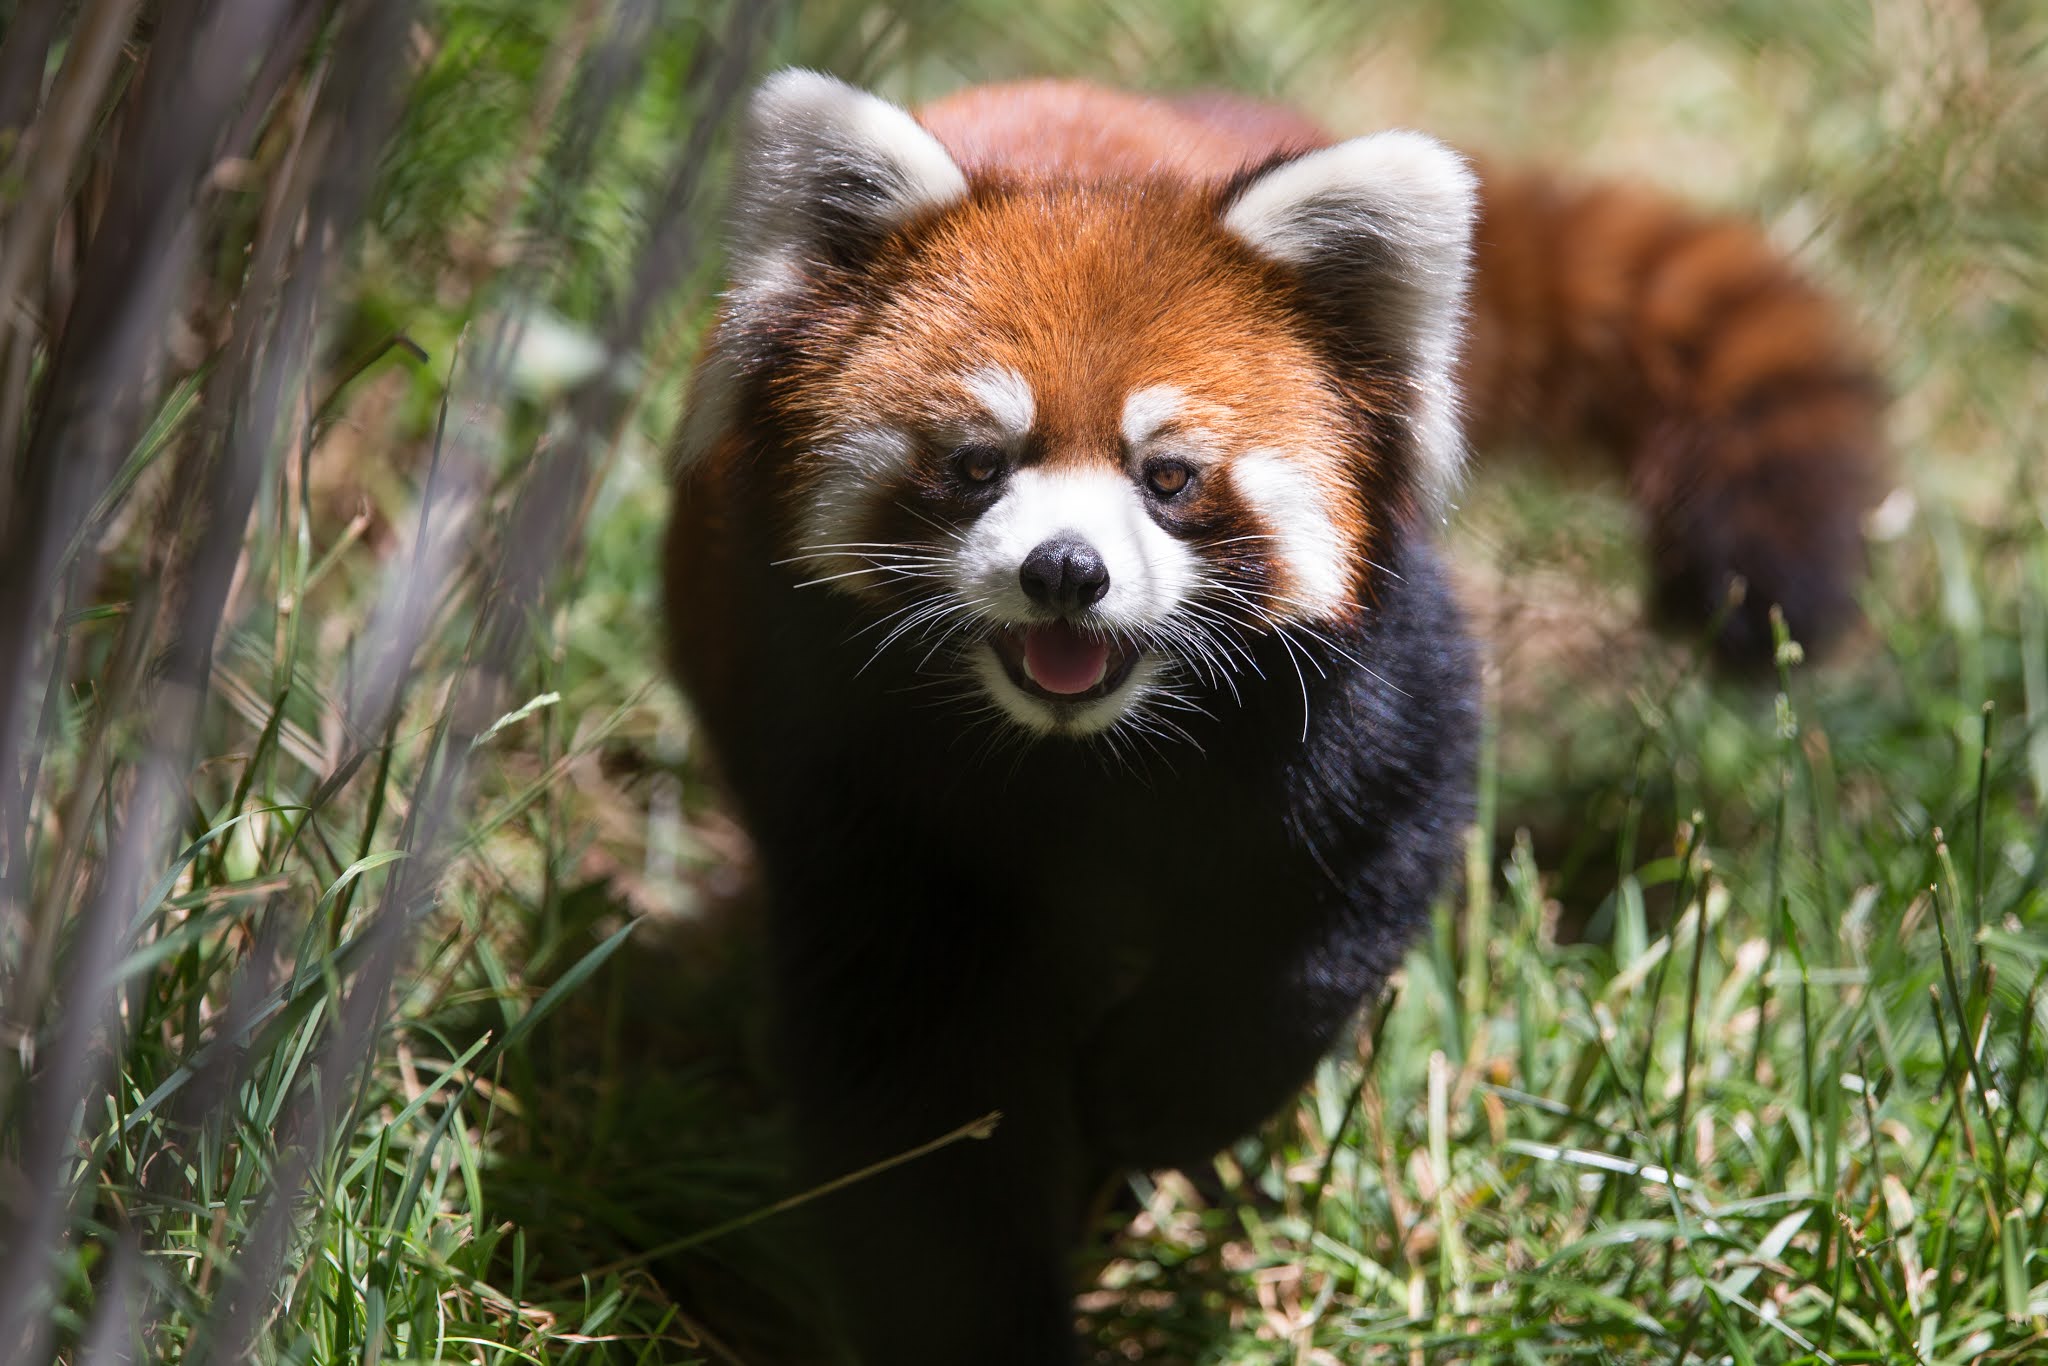 Red Panda at the Central Park Zoo